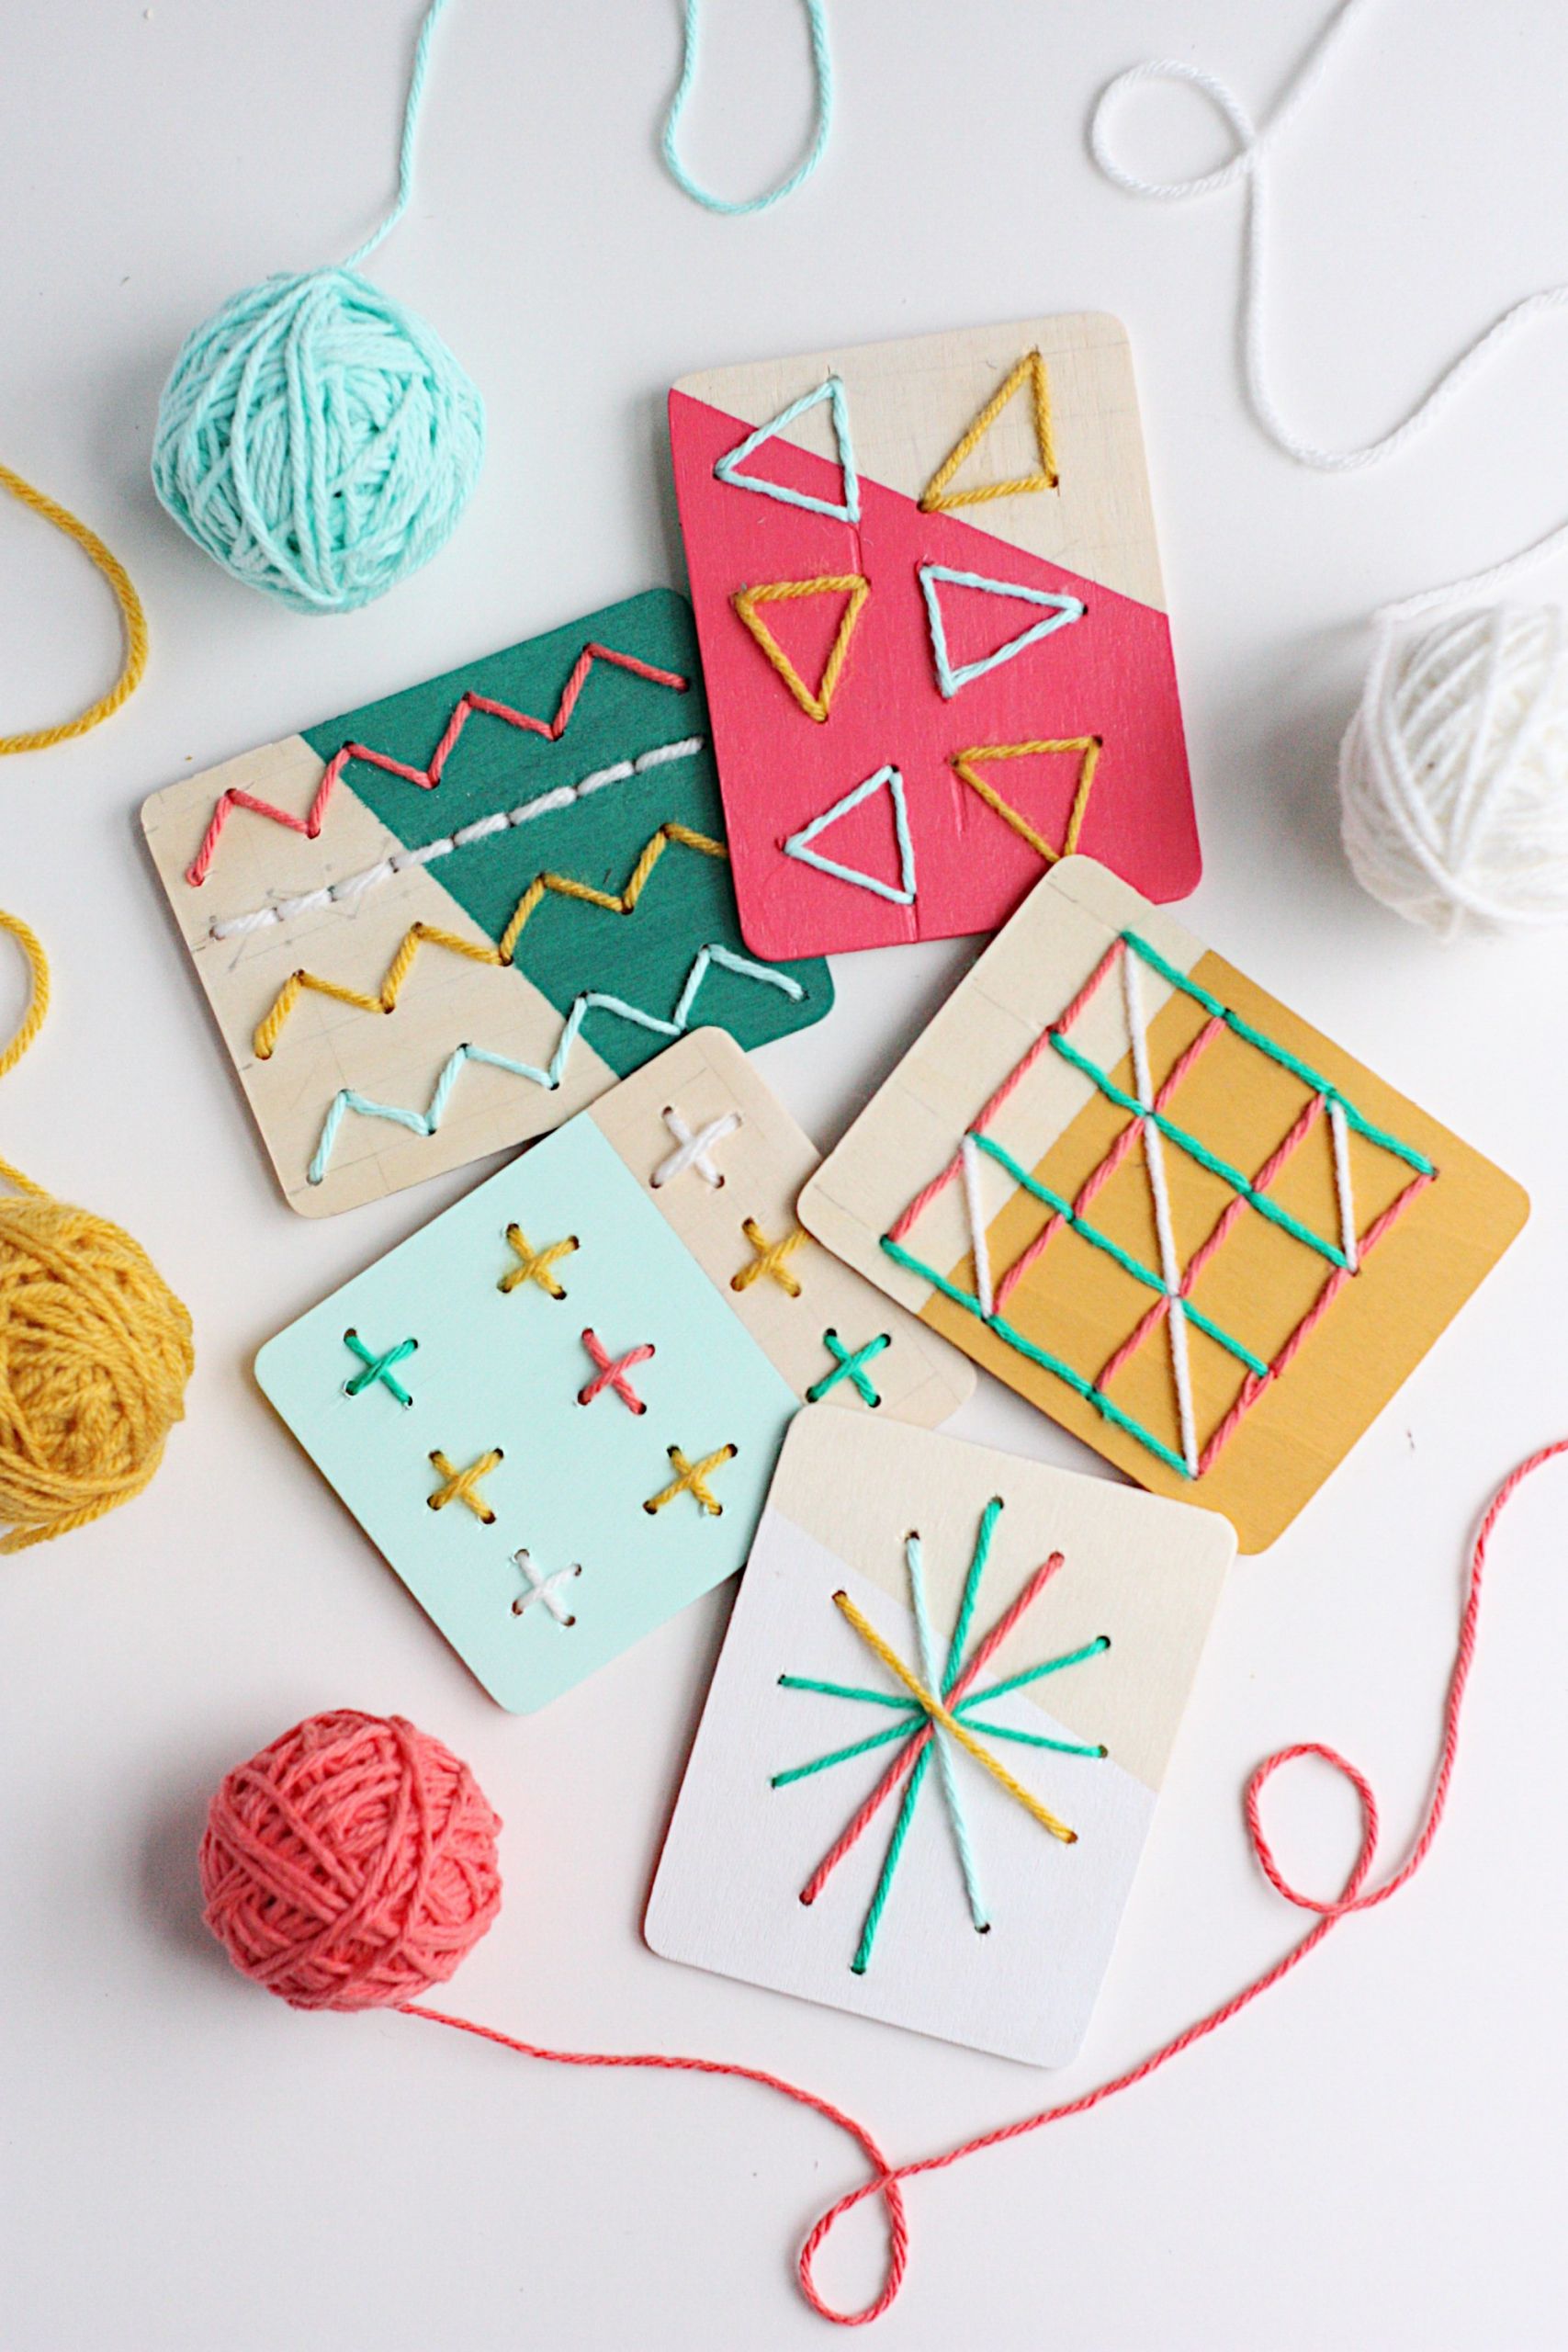 DIY Projects For Kids
 11 DIY Yarn Crafts That Will Amaze Your Kids Shelterness